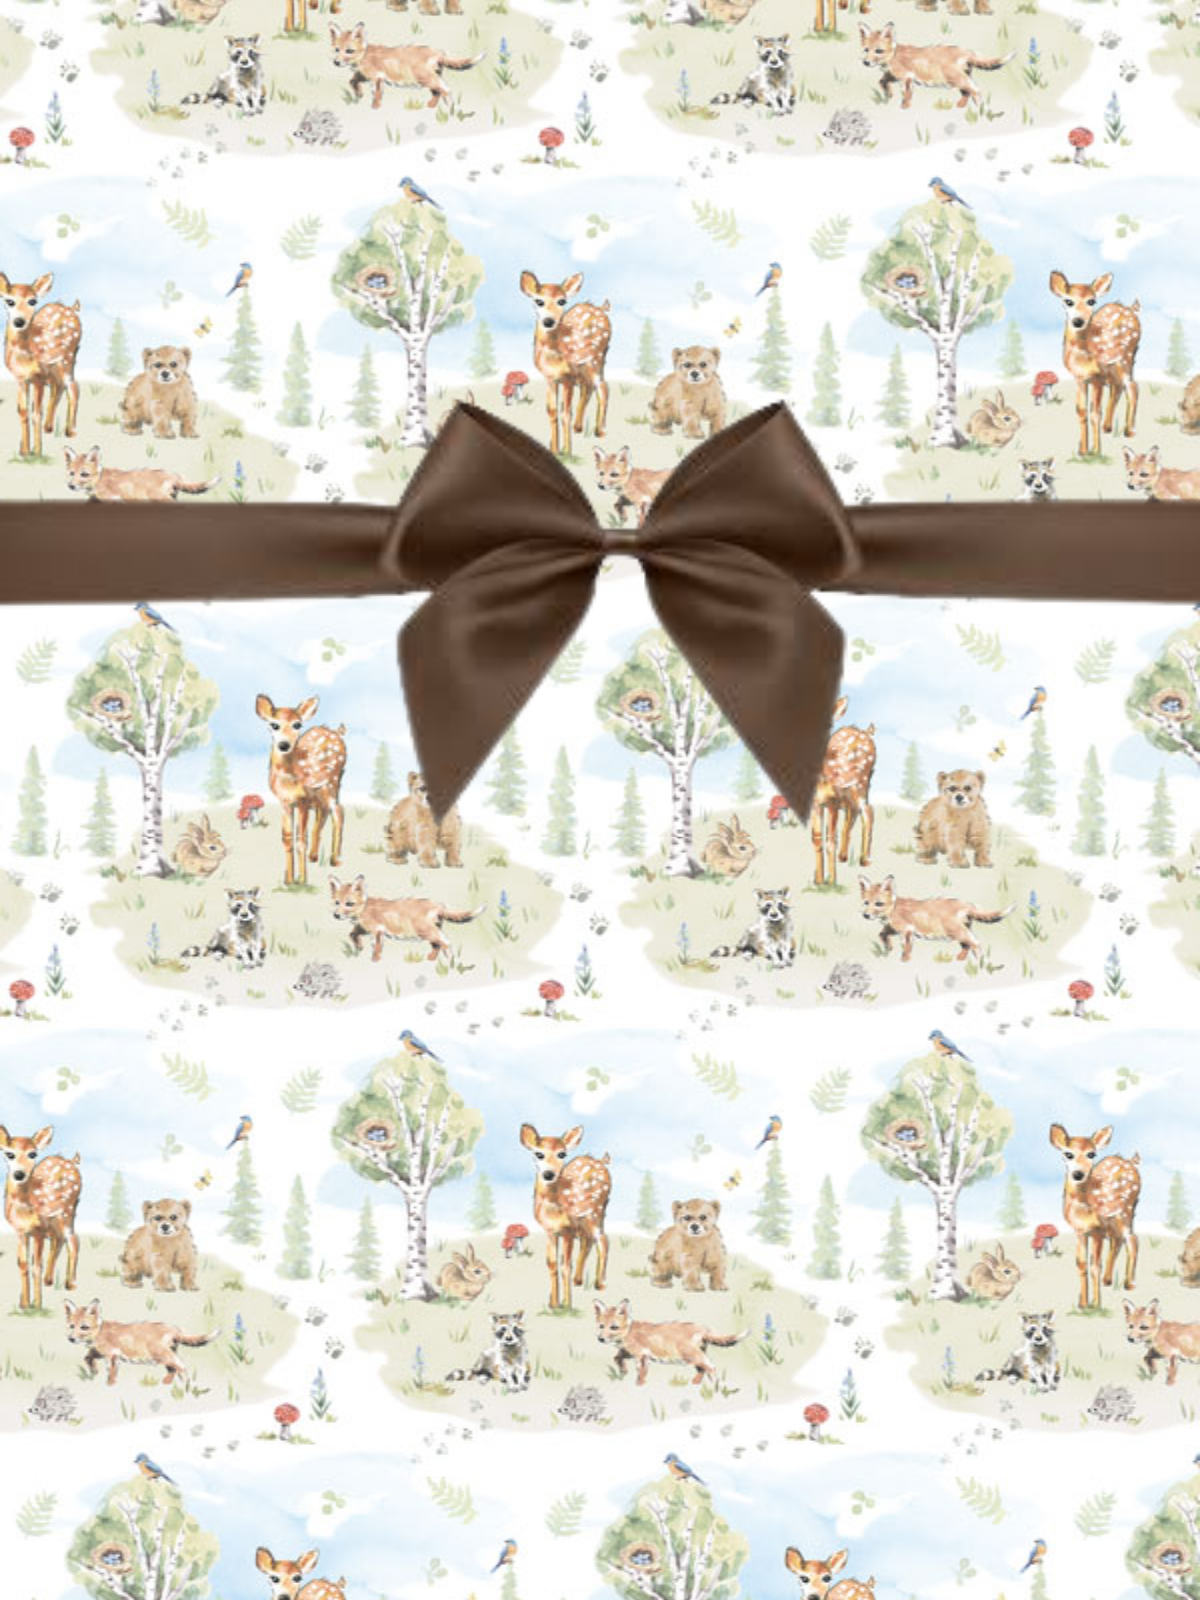 Snuggle Animals Baby Shower Woodland Deer Fox Hare Birthday / Special Occasion Gift Wrap Wrapping Paper-15ft - image 1 of 1